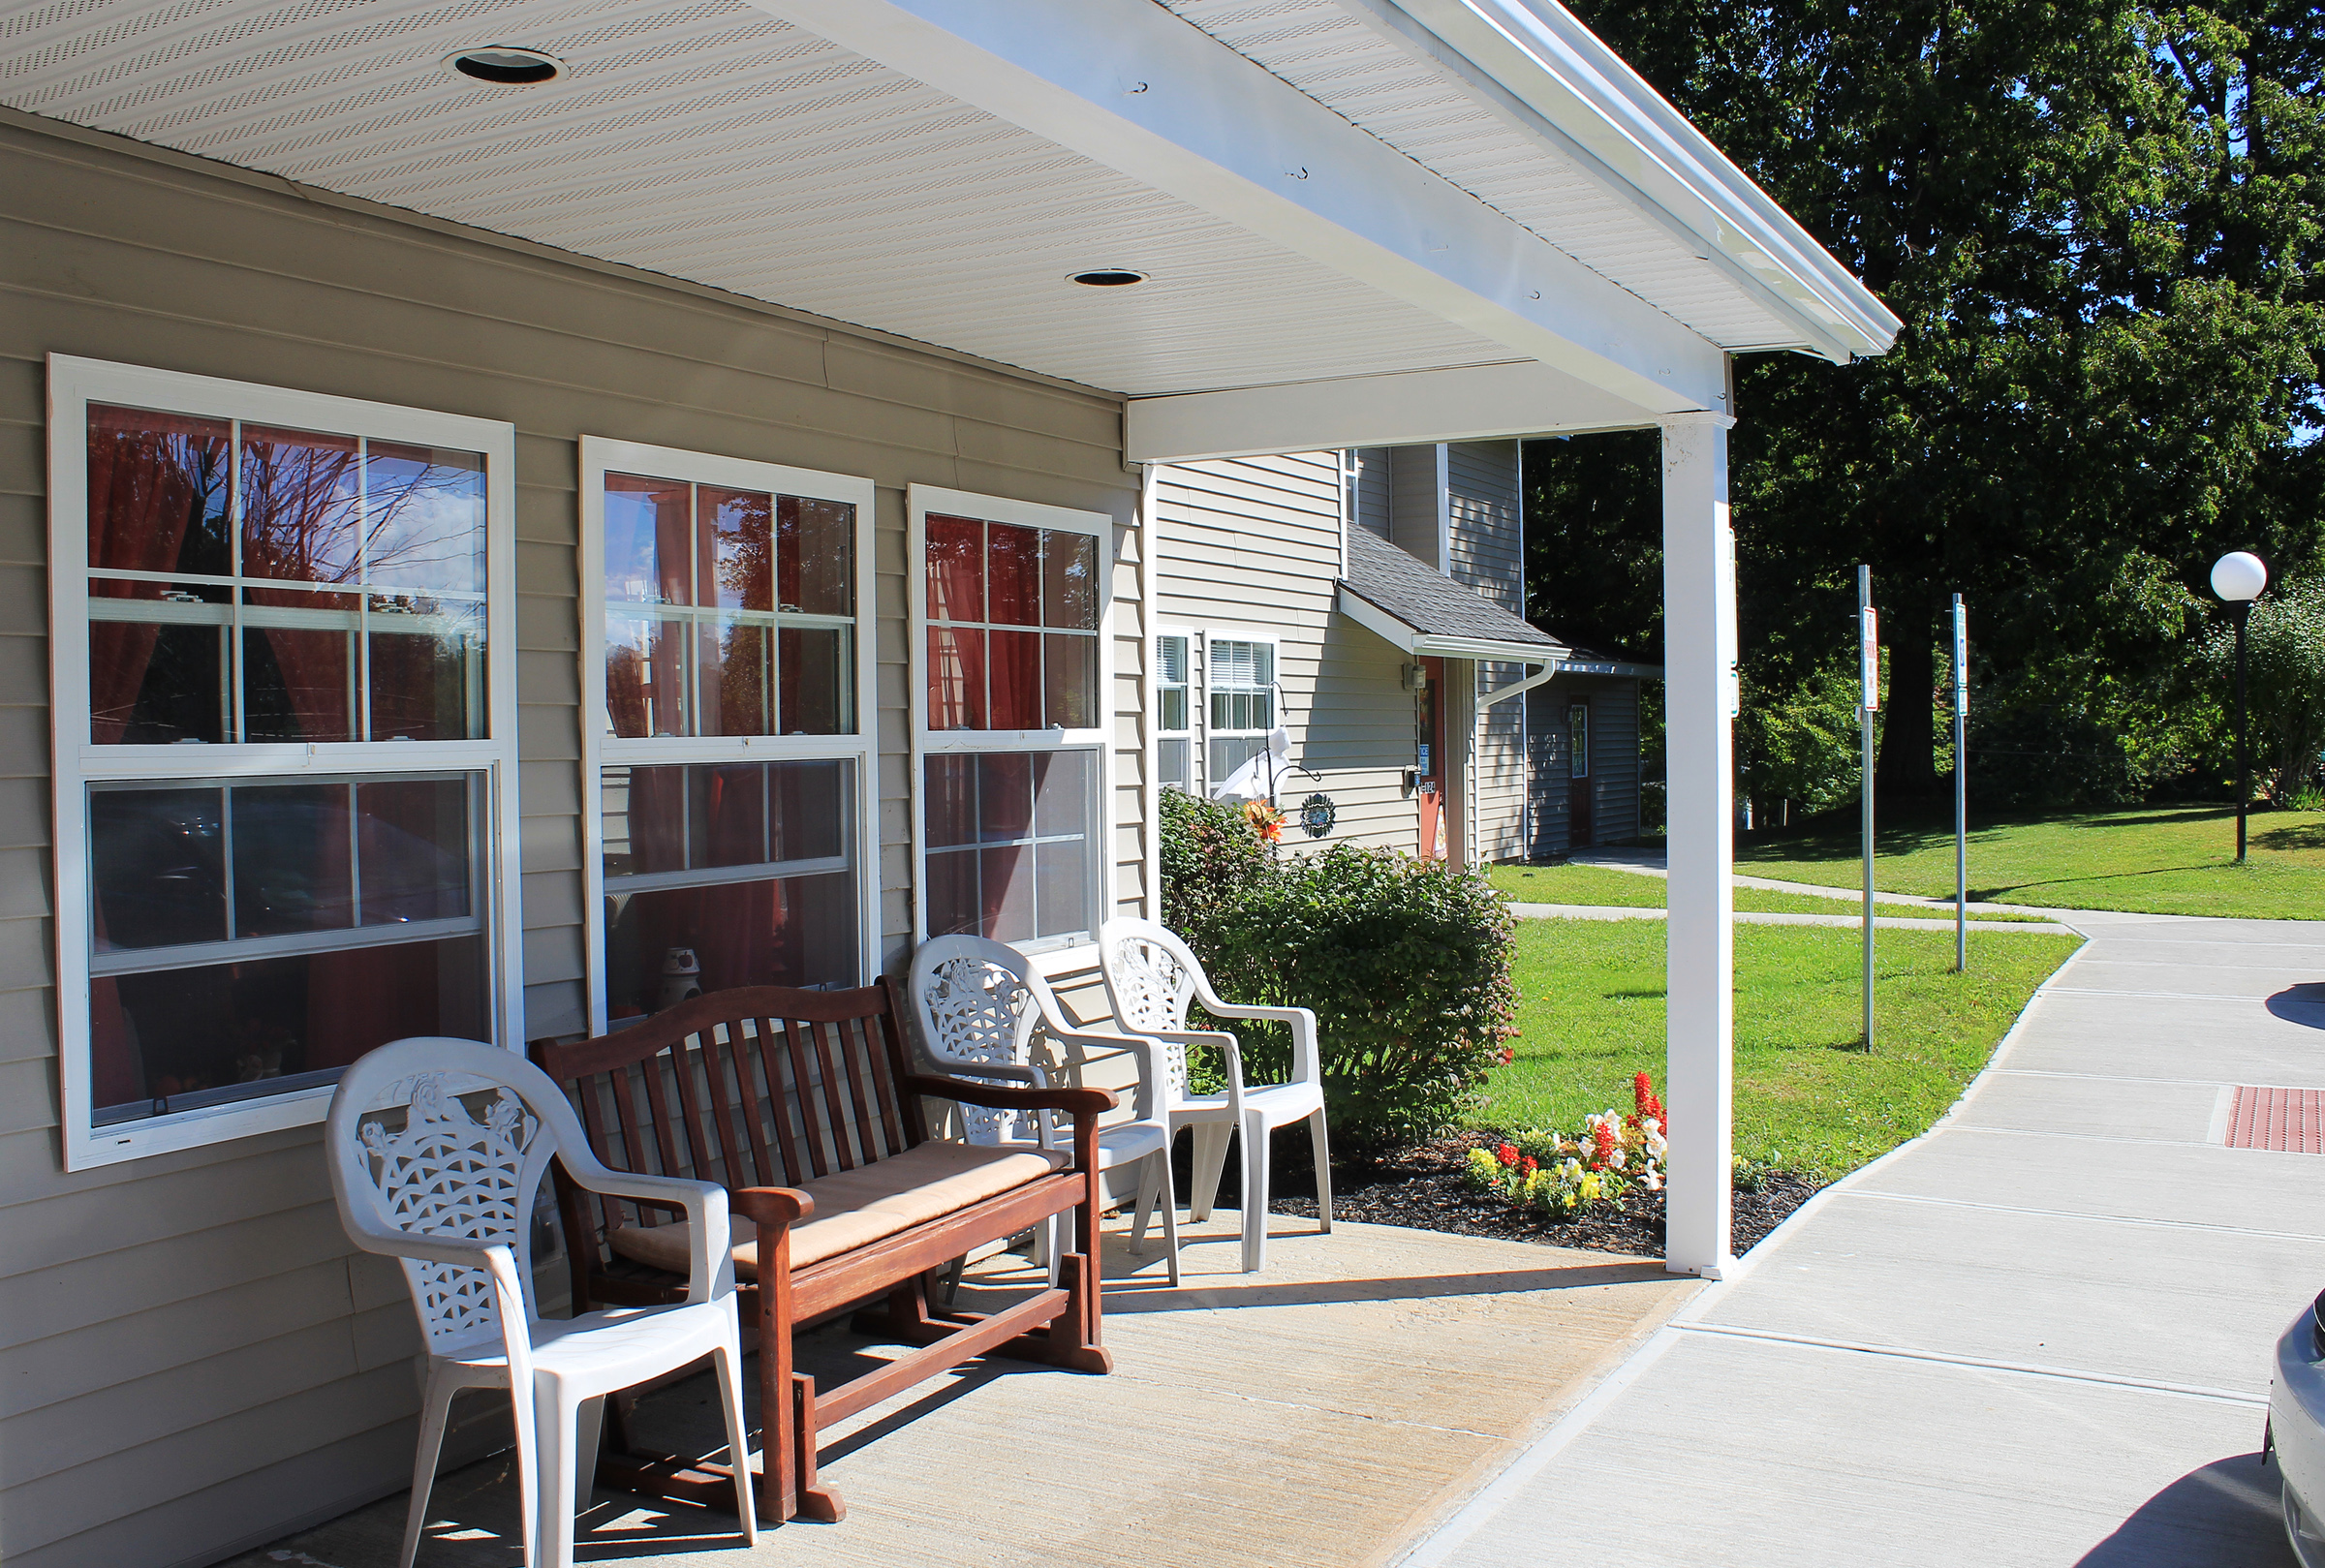 property management company client list syracuse ny porch view image of fair haven senior apartments